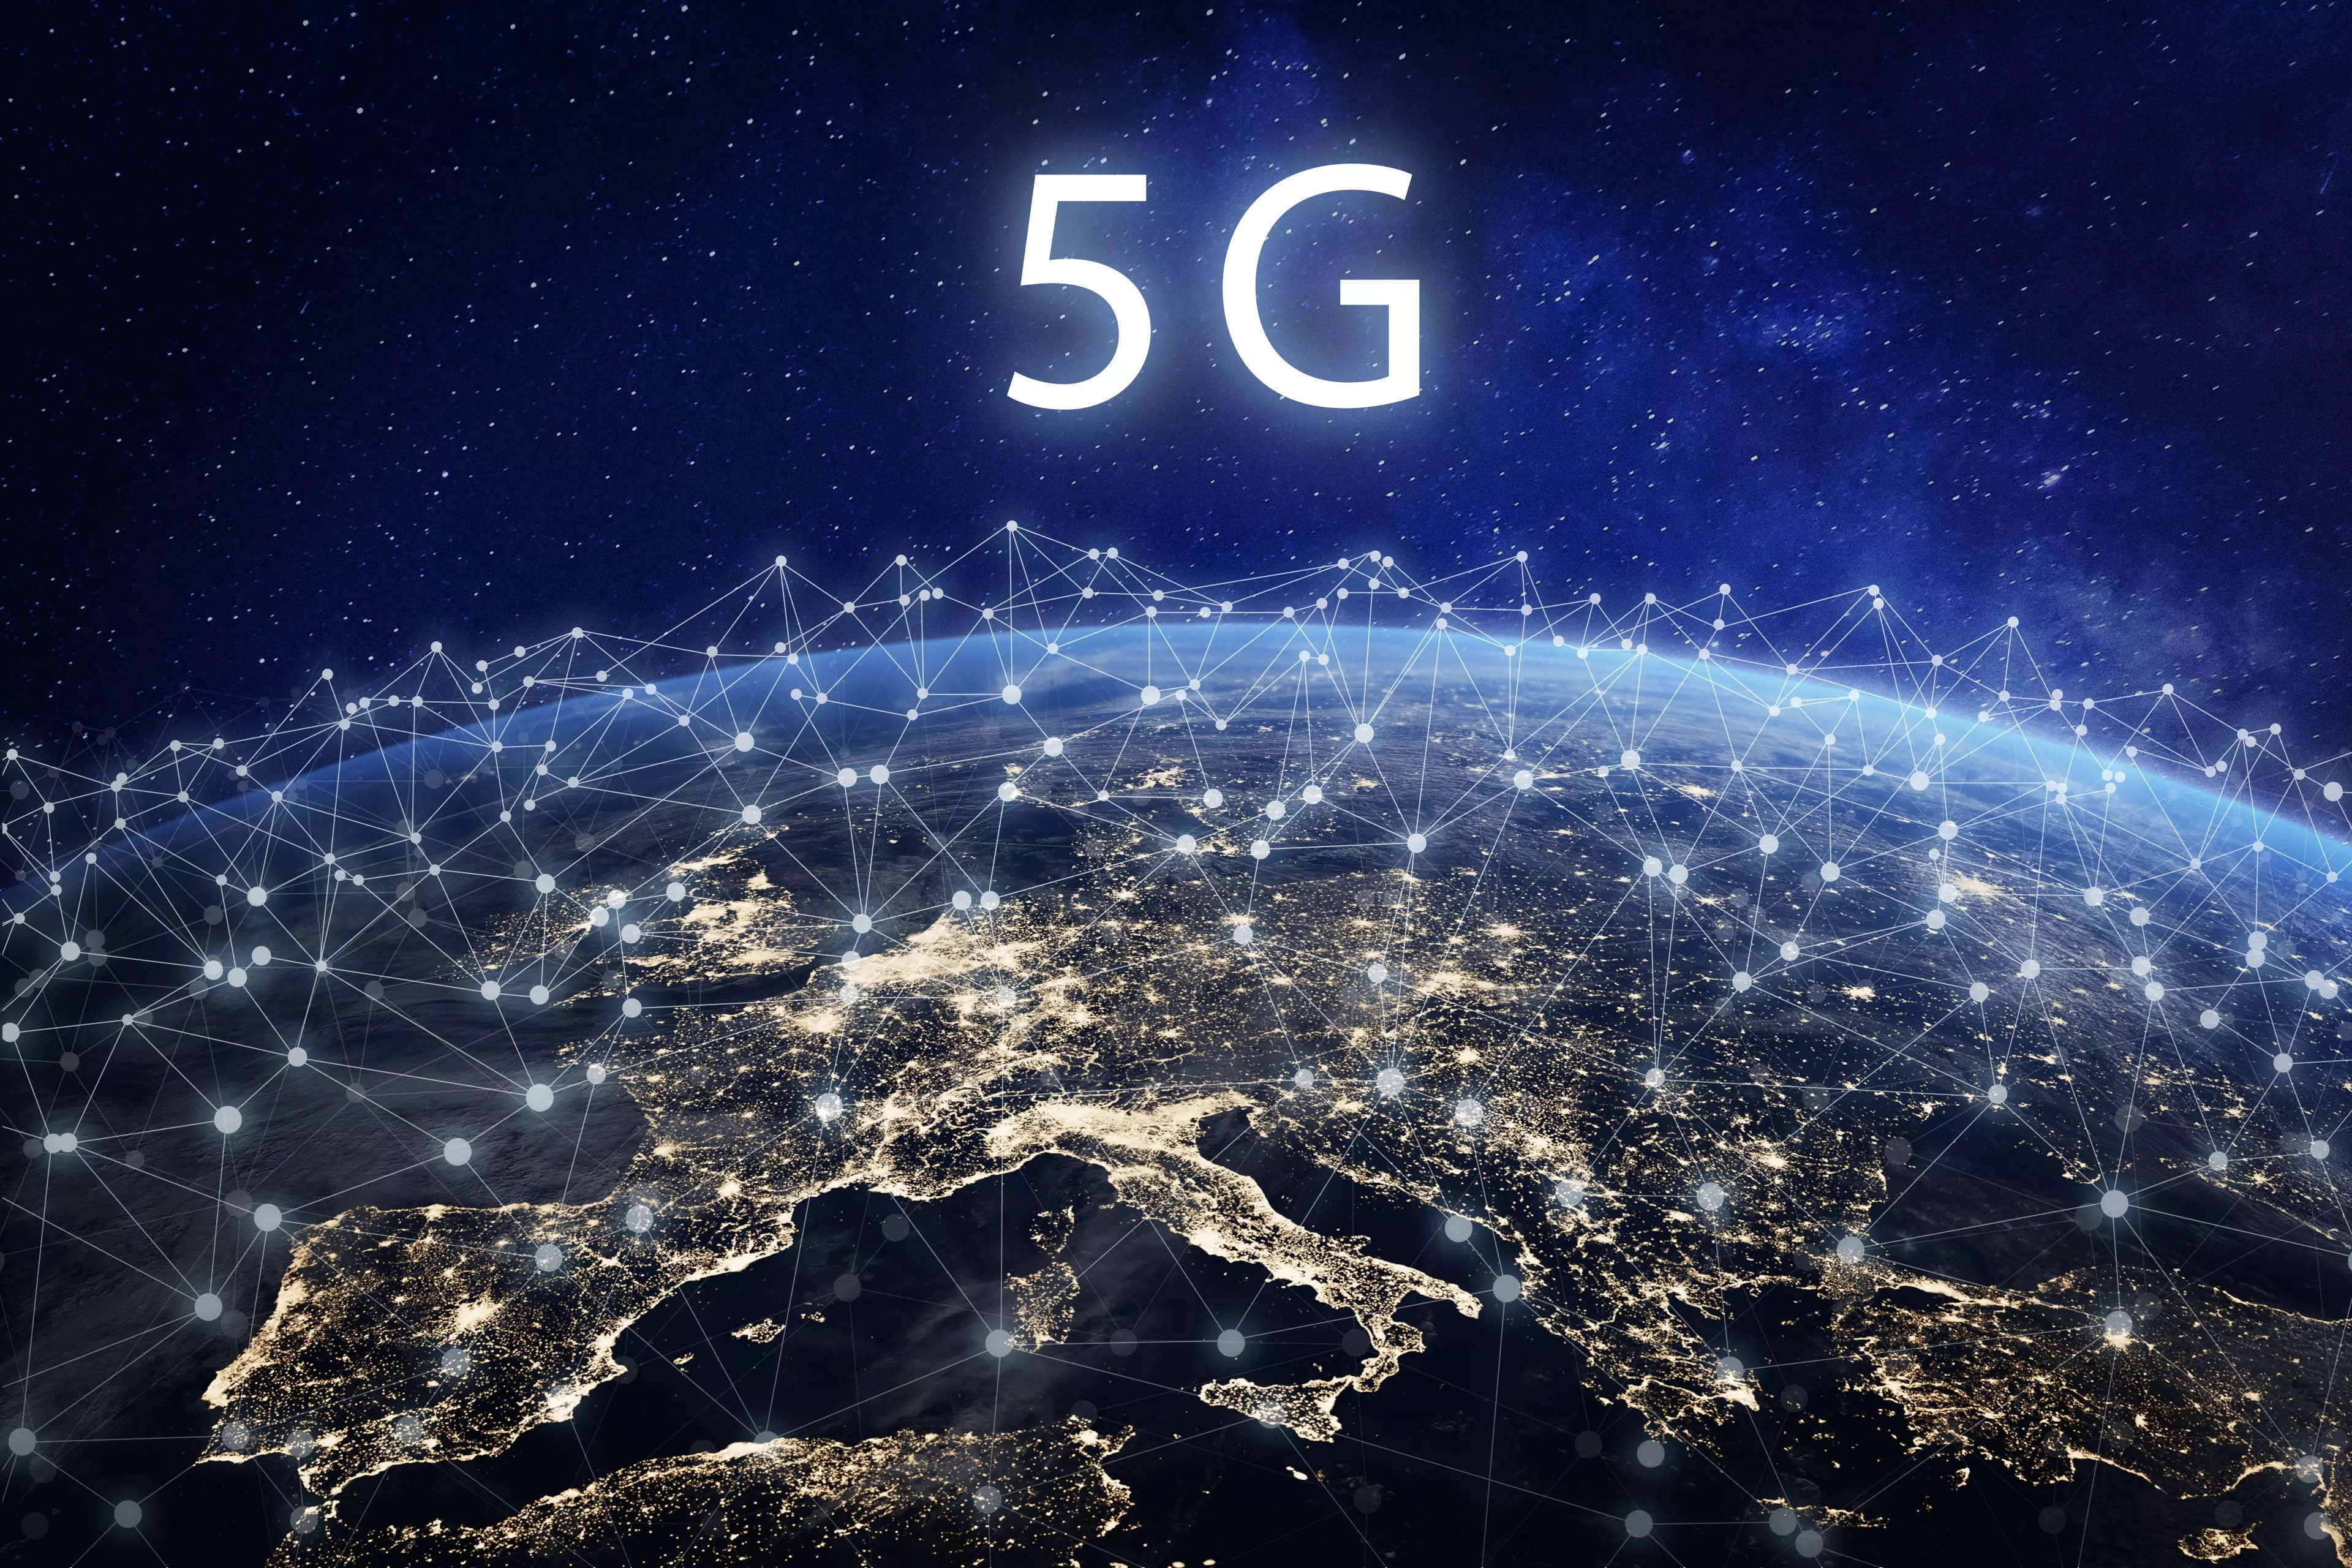 Reserving 28GHz frequency band for satellite will not discourage propagation of 5G: Space group